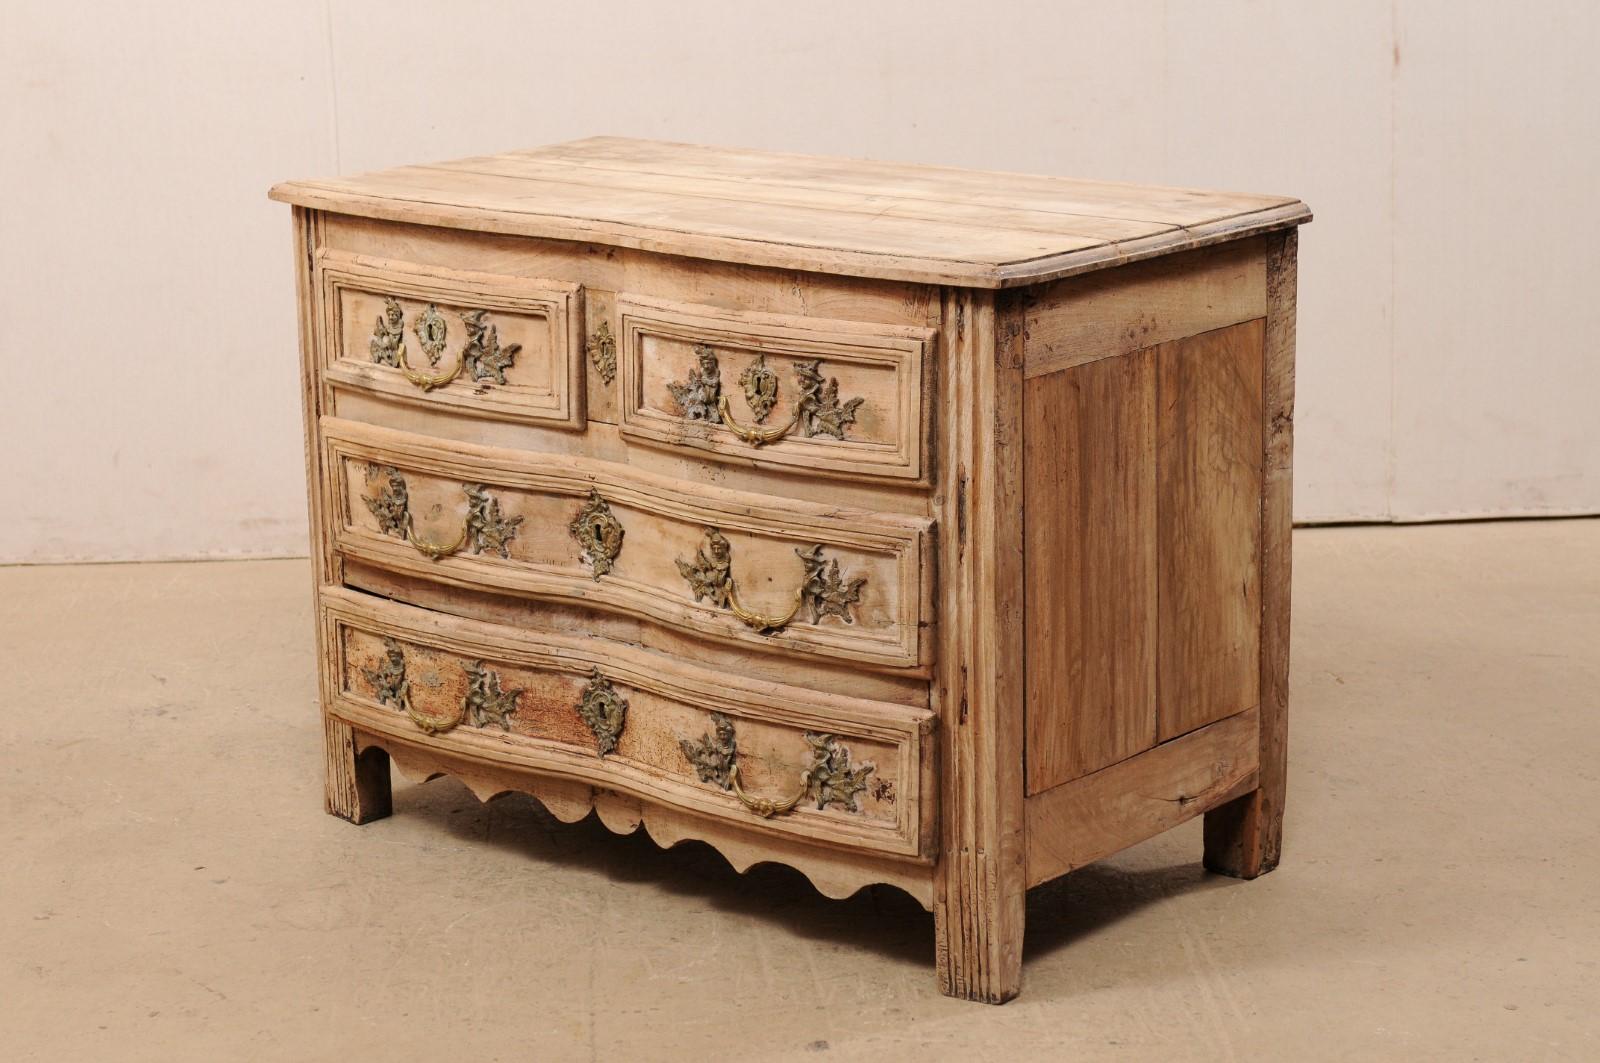 French Period Rococo Serpentine Front Carved-Wood Chest with Elaborate Hardware 1